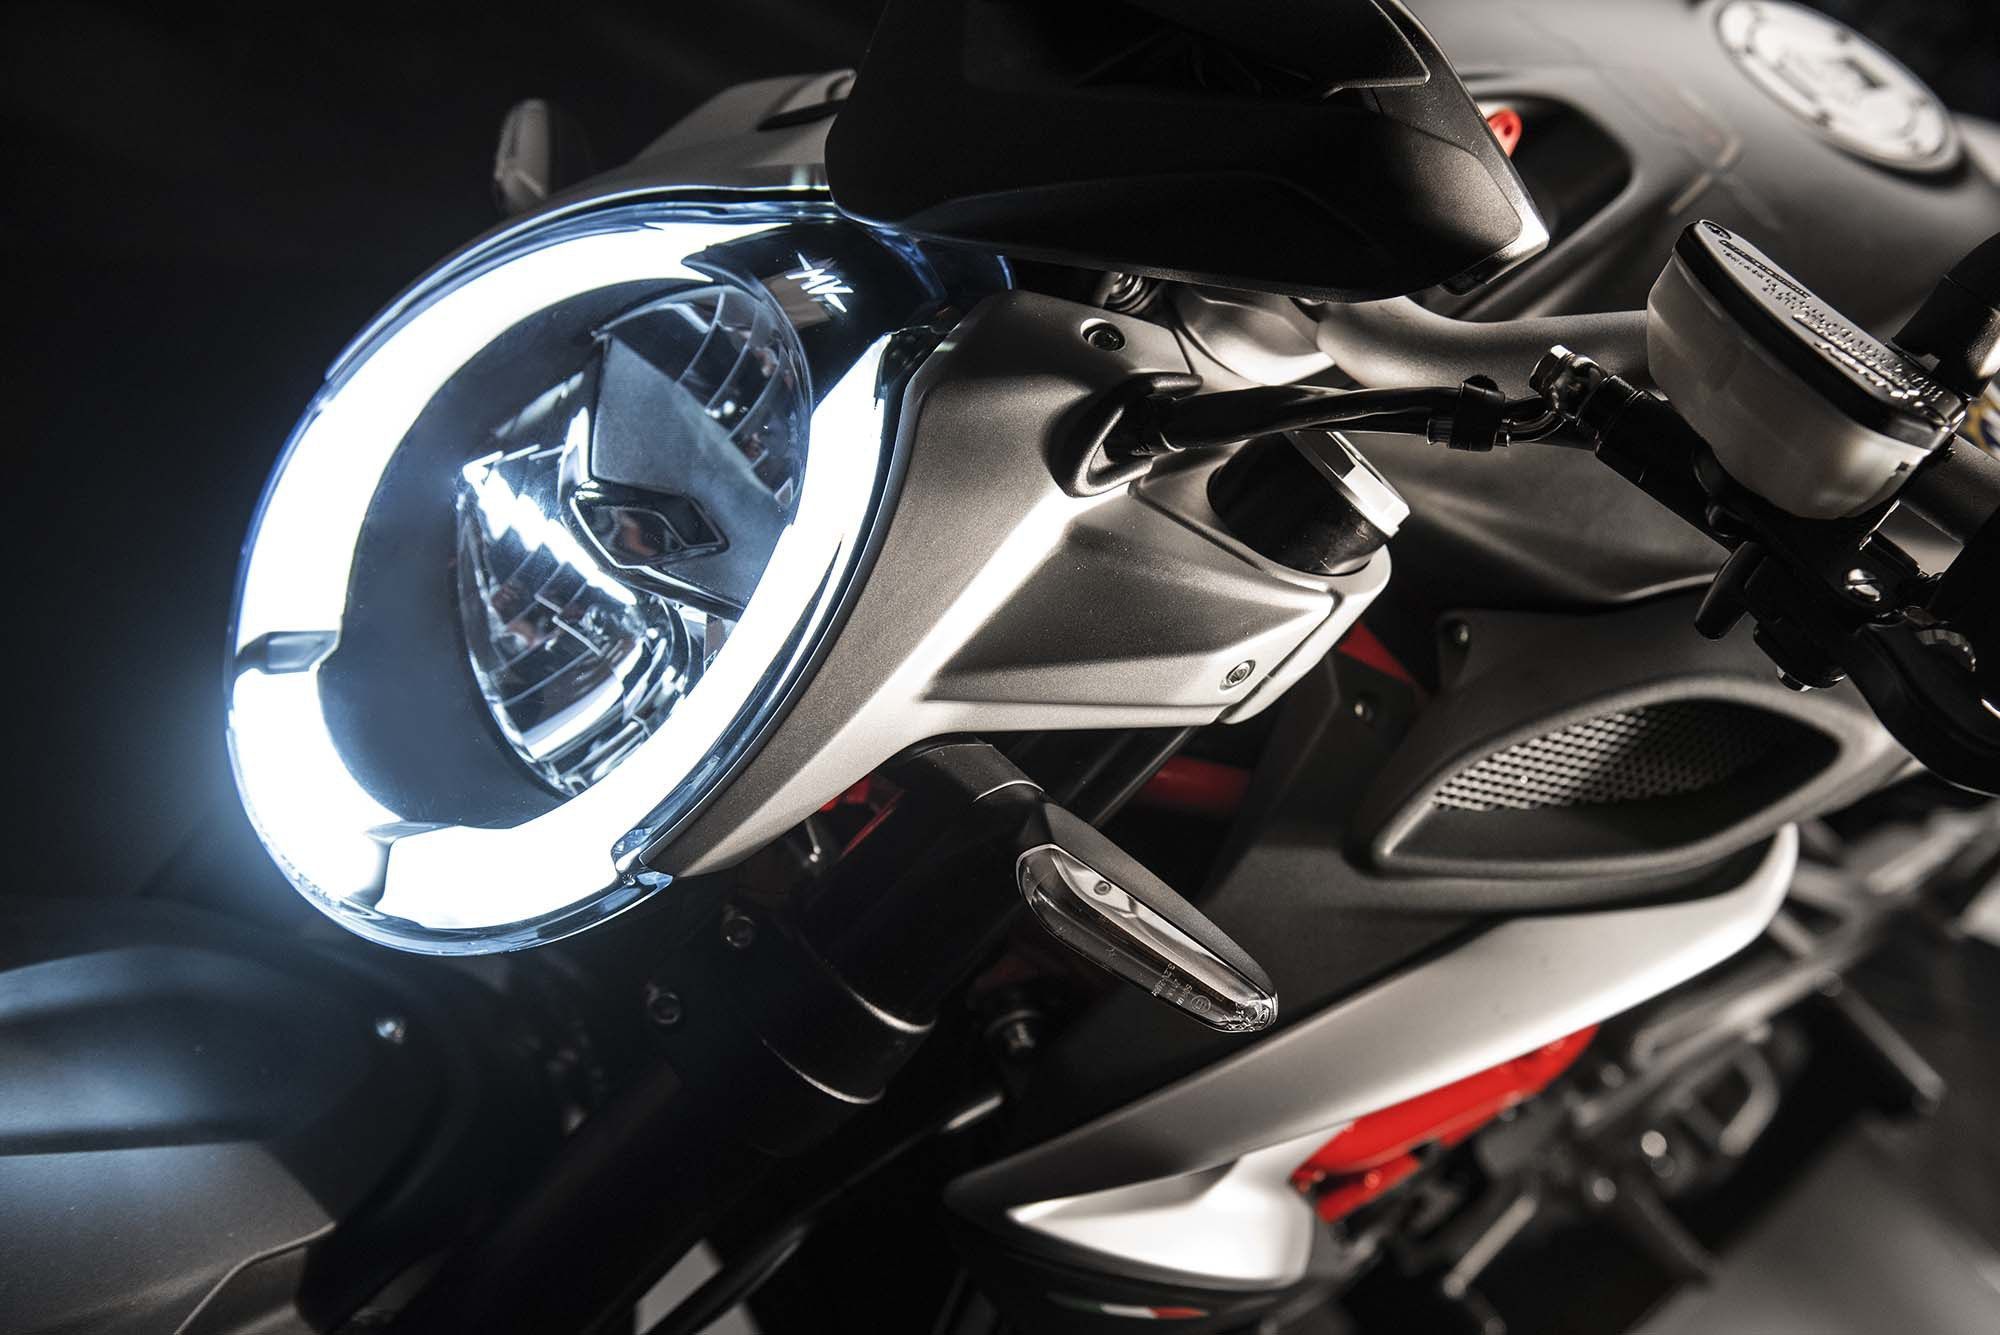 The 2016 MV Agusta Brutale 800: New front end look.